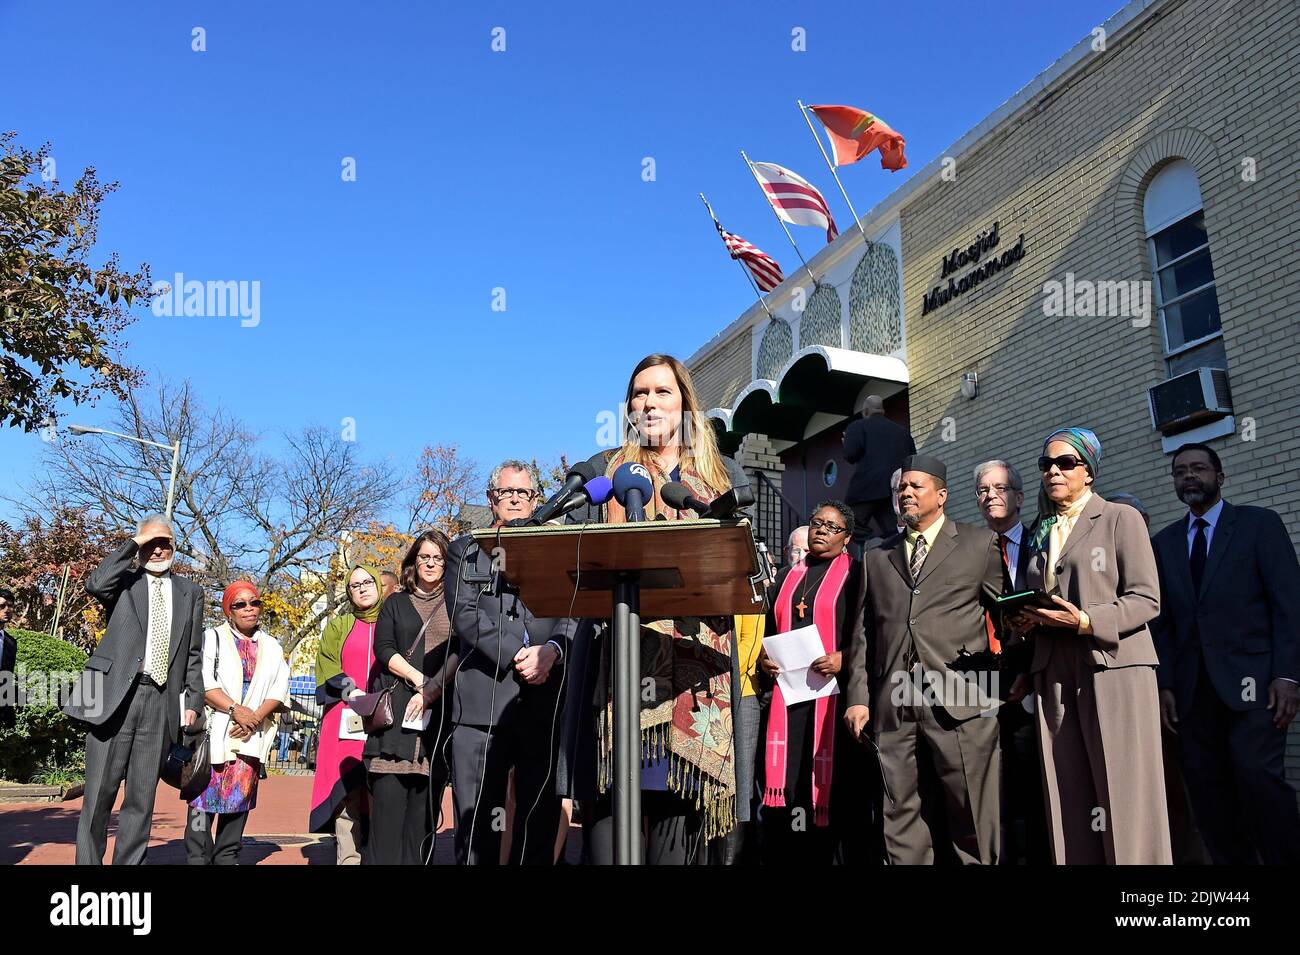 Catherine Orsborn (pictured), Campaign Director of Shoulder to Shoulder, an interfaith organization dedicated to ending anti-Muslim bigotry, speaks at a press conference calling on President-elect Donald Trump to respect religious liberty. In the aftermath of the election and in response to the rising hate crimes against Muslims, national Christian and Jewish leaders joined their Muslim colleagues at Masjid Muhammad in Washington, DC, USA, on Friday, November 18, 2016 for the daily Muslim prayer service. Photo by Ron Sachs/CNP/ABACAPRESS.COM Stock Photo